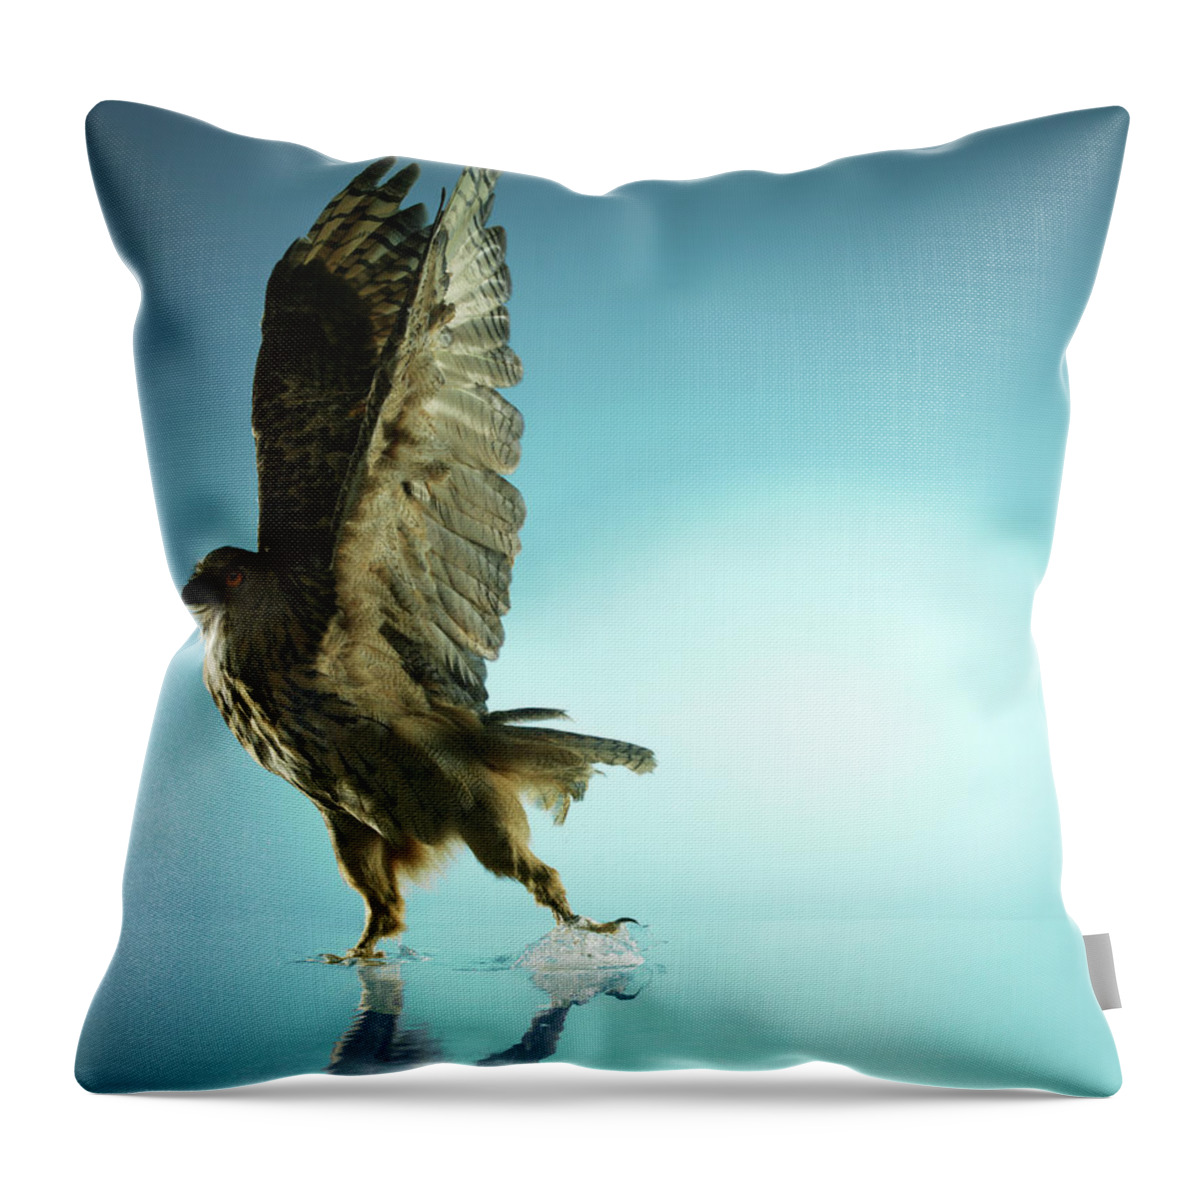 One Animal Throw Pillow featuring the photograph Owl With Wings Raised, Studio Shot by Biwa Studio